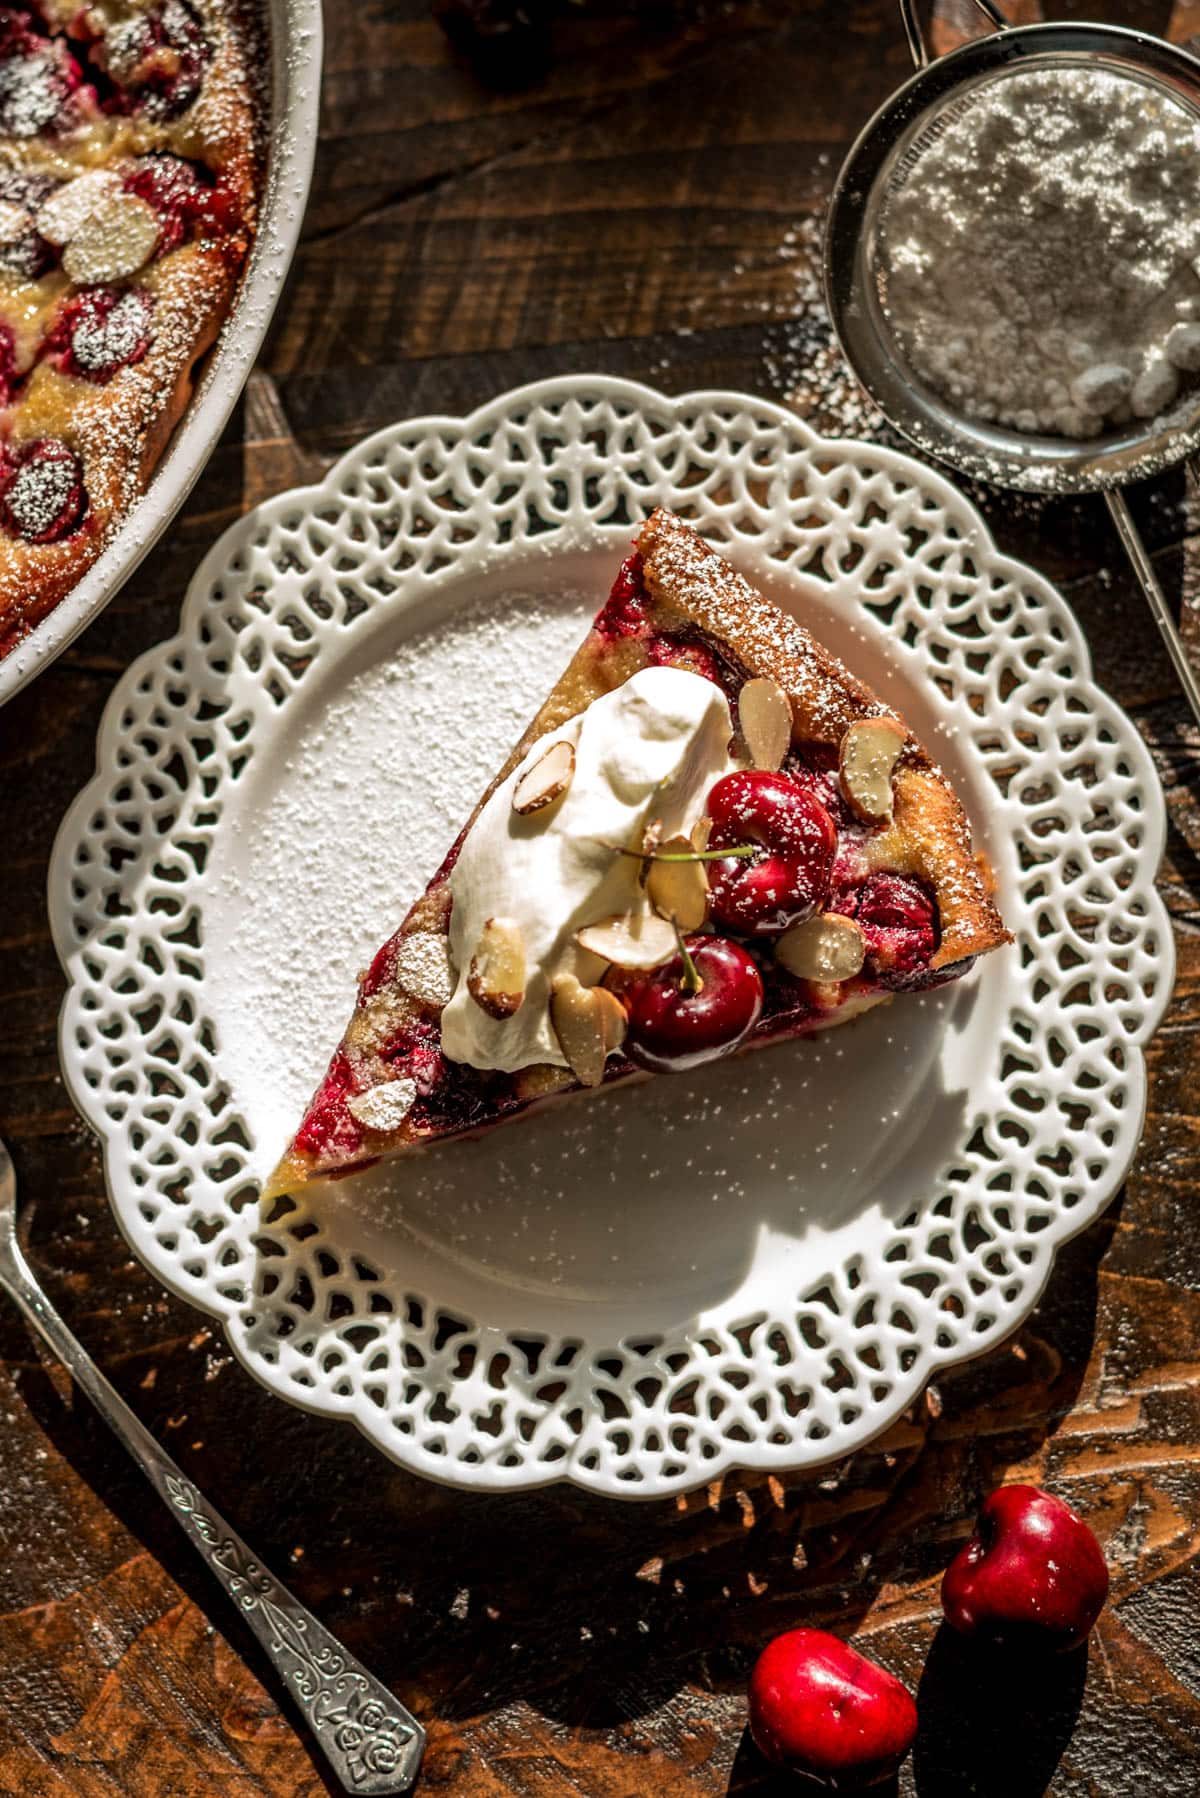 A slice of cherry clafoutis topped with fresh cherries, whipped cream, powdered sugar, and sliced almonds atop a lace-rimmed white plate.